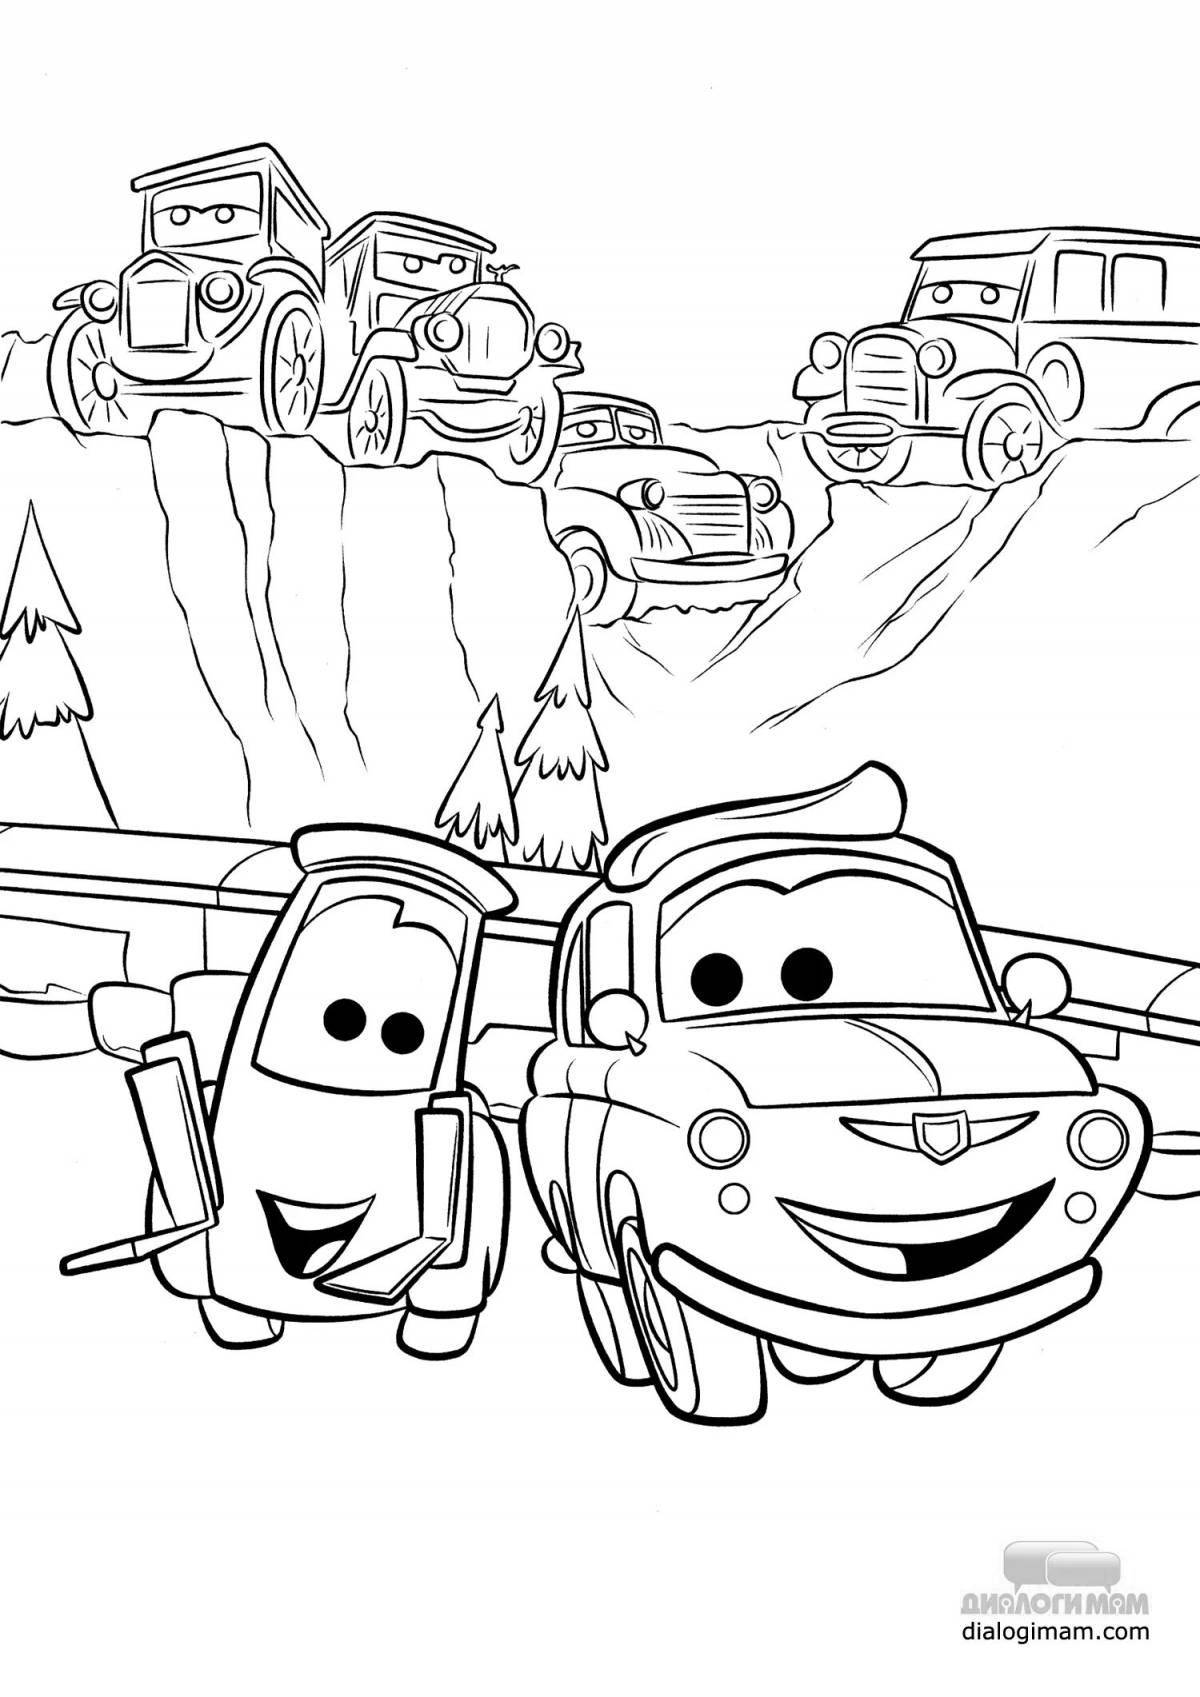 Fancy ollie truck coloring page